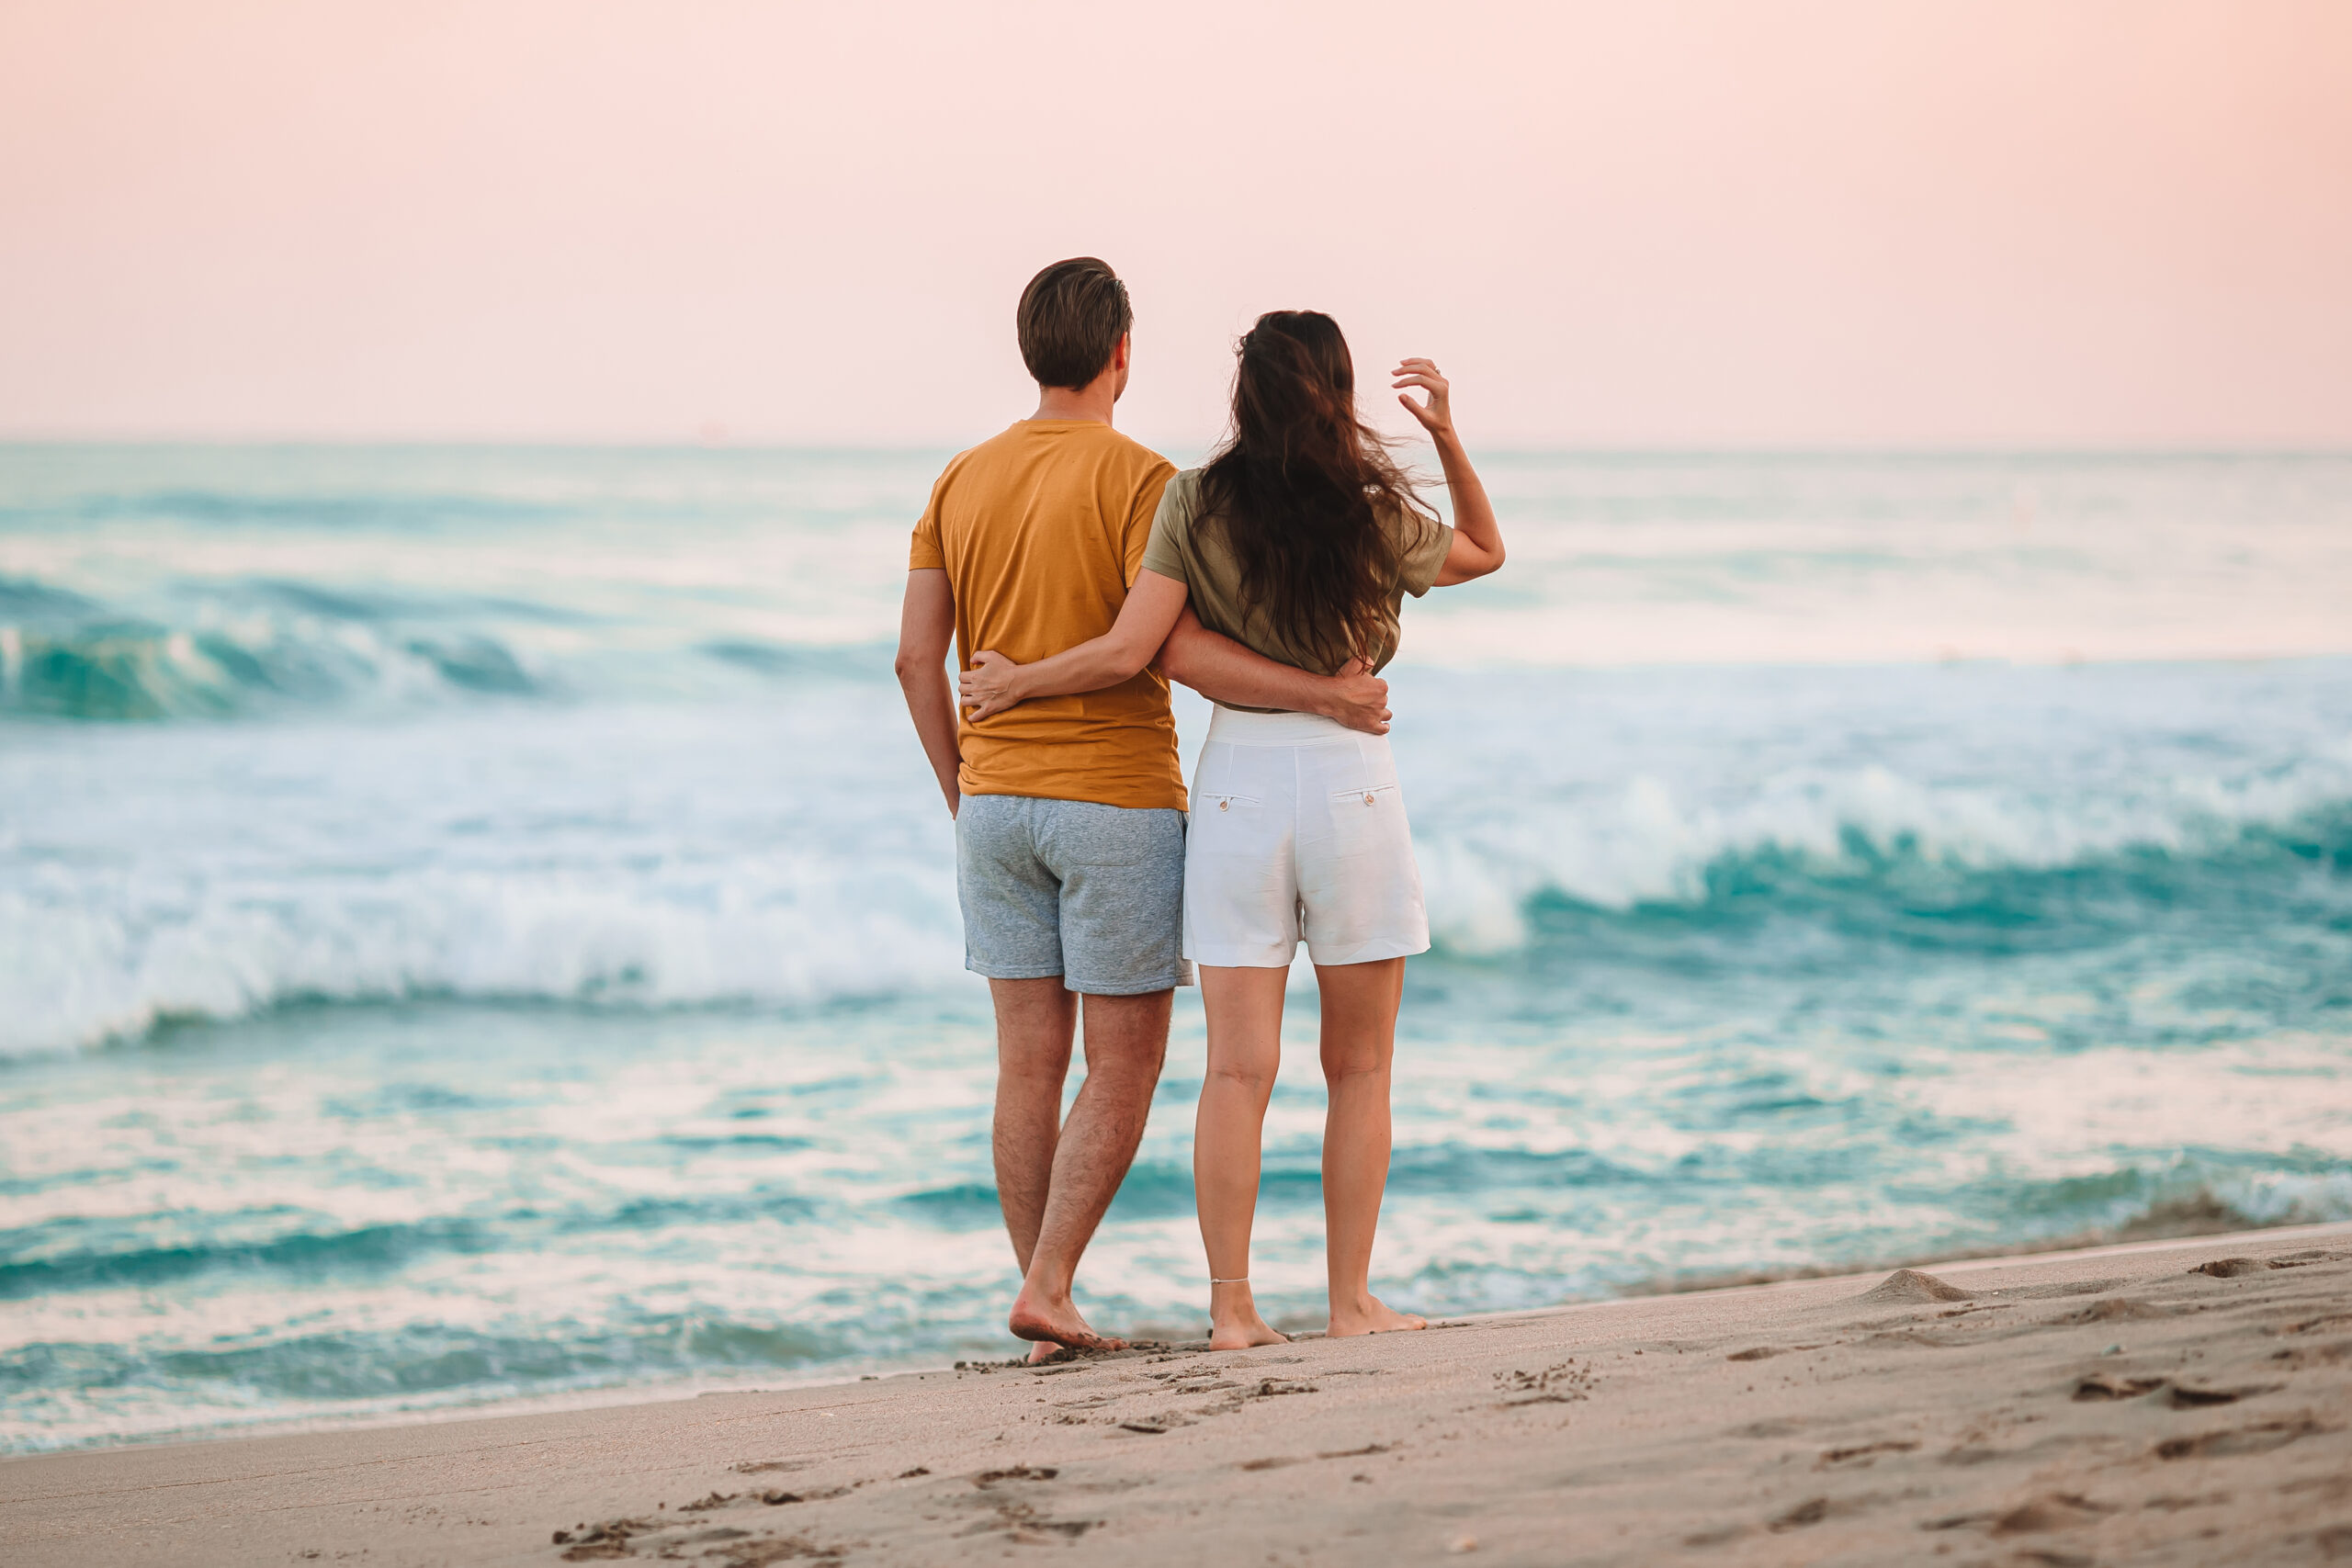 Beachside Bliss: Romantic Activities for Couples on a Coastal Weekend Getaway